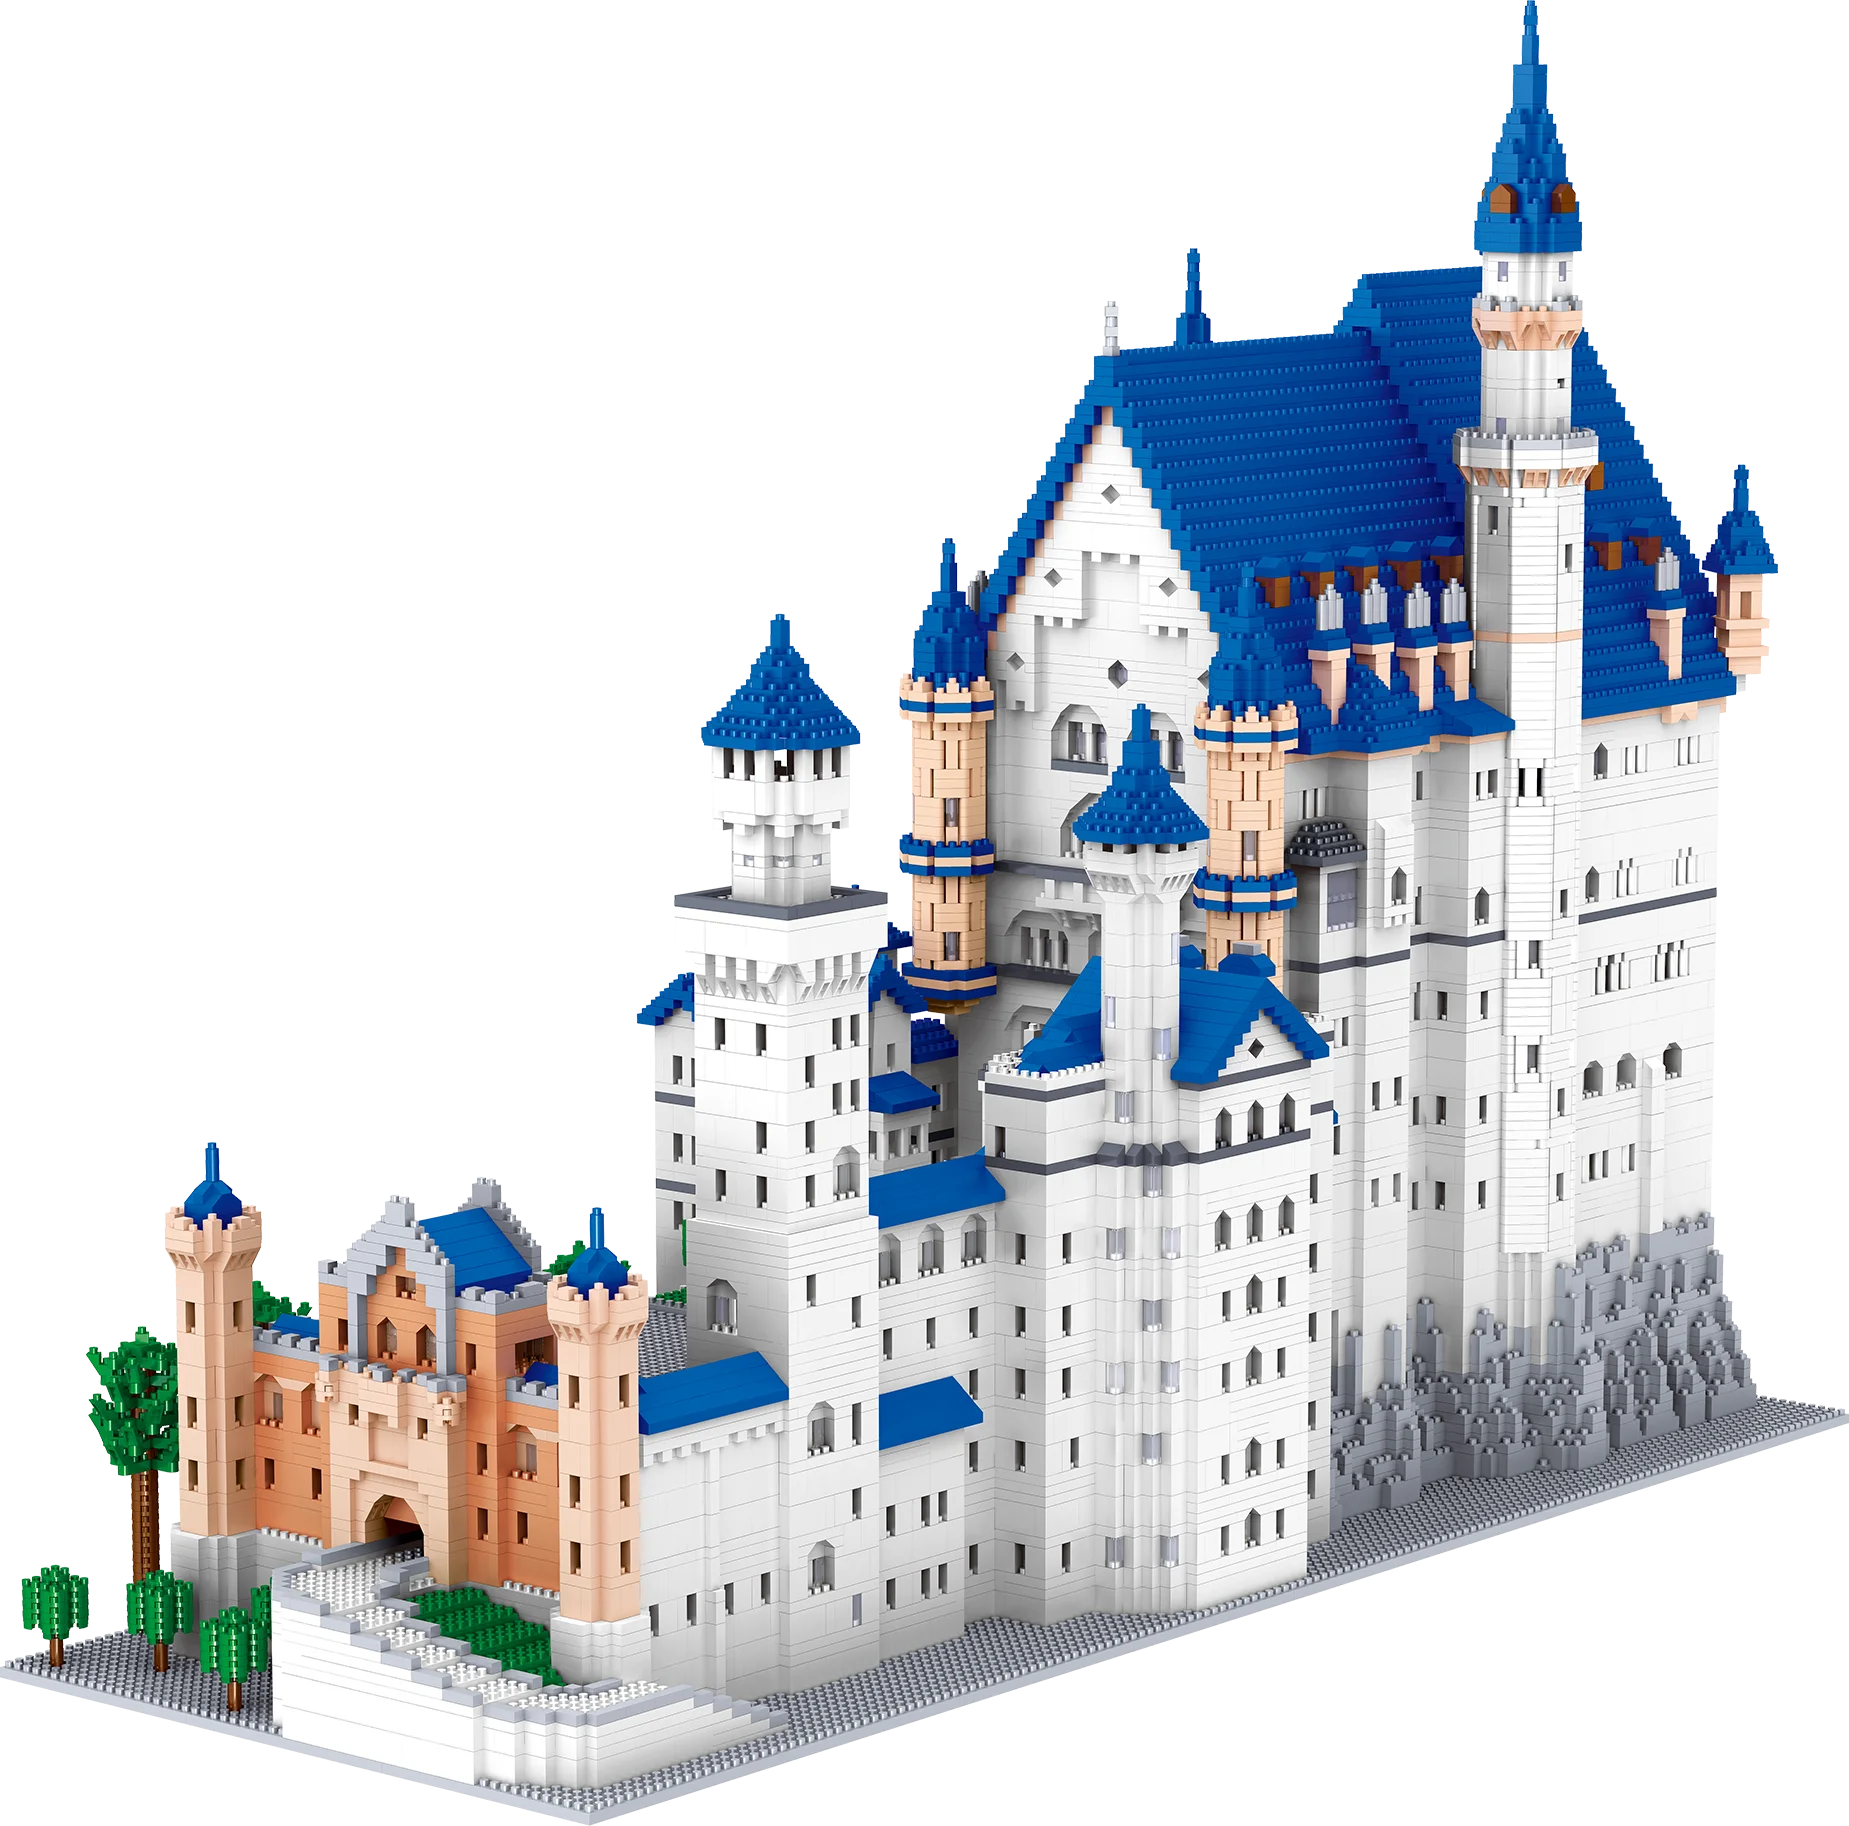 

Neuschwanstein Castle Princess Building Blocks Kit Makes a Great Gift for Boys and Girls Birthday Party Favors